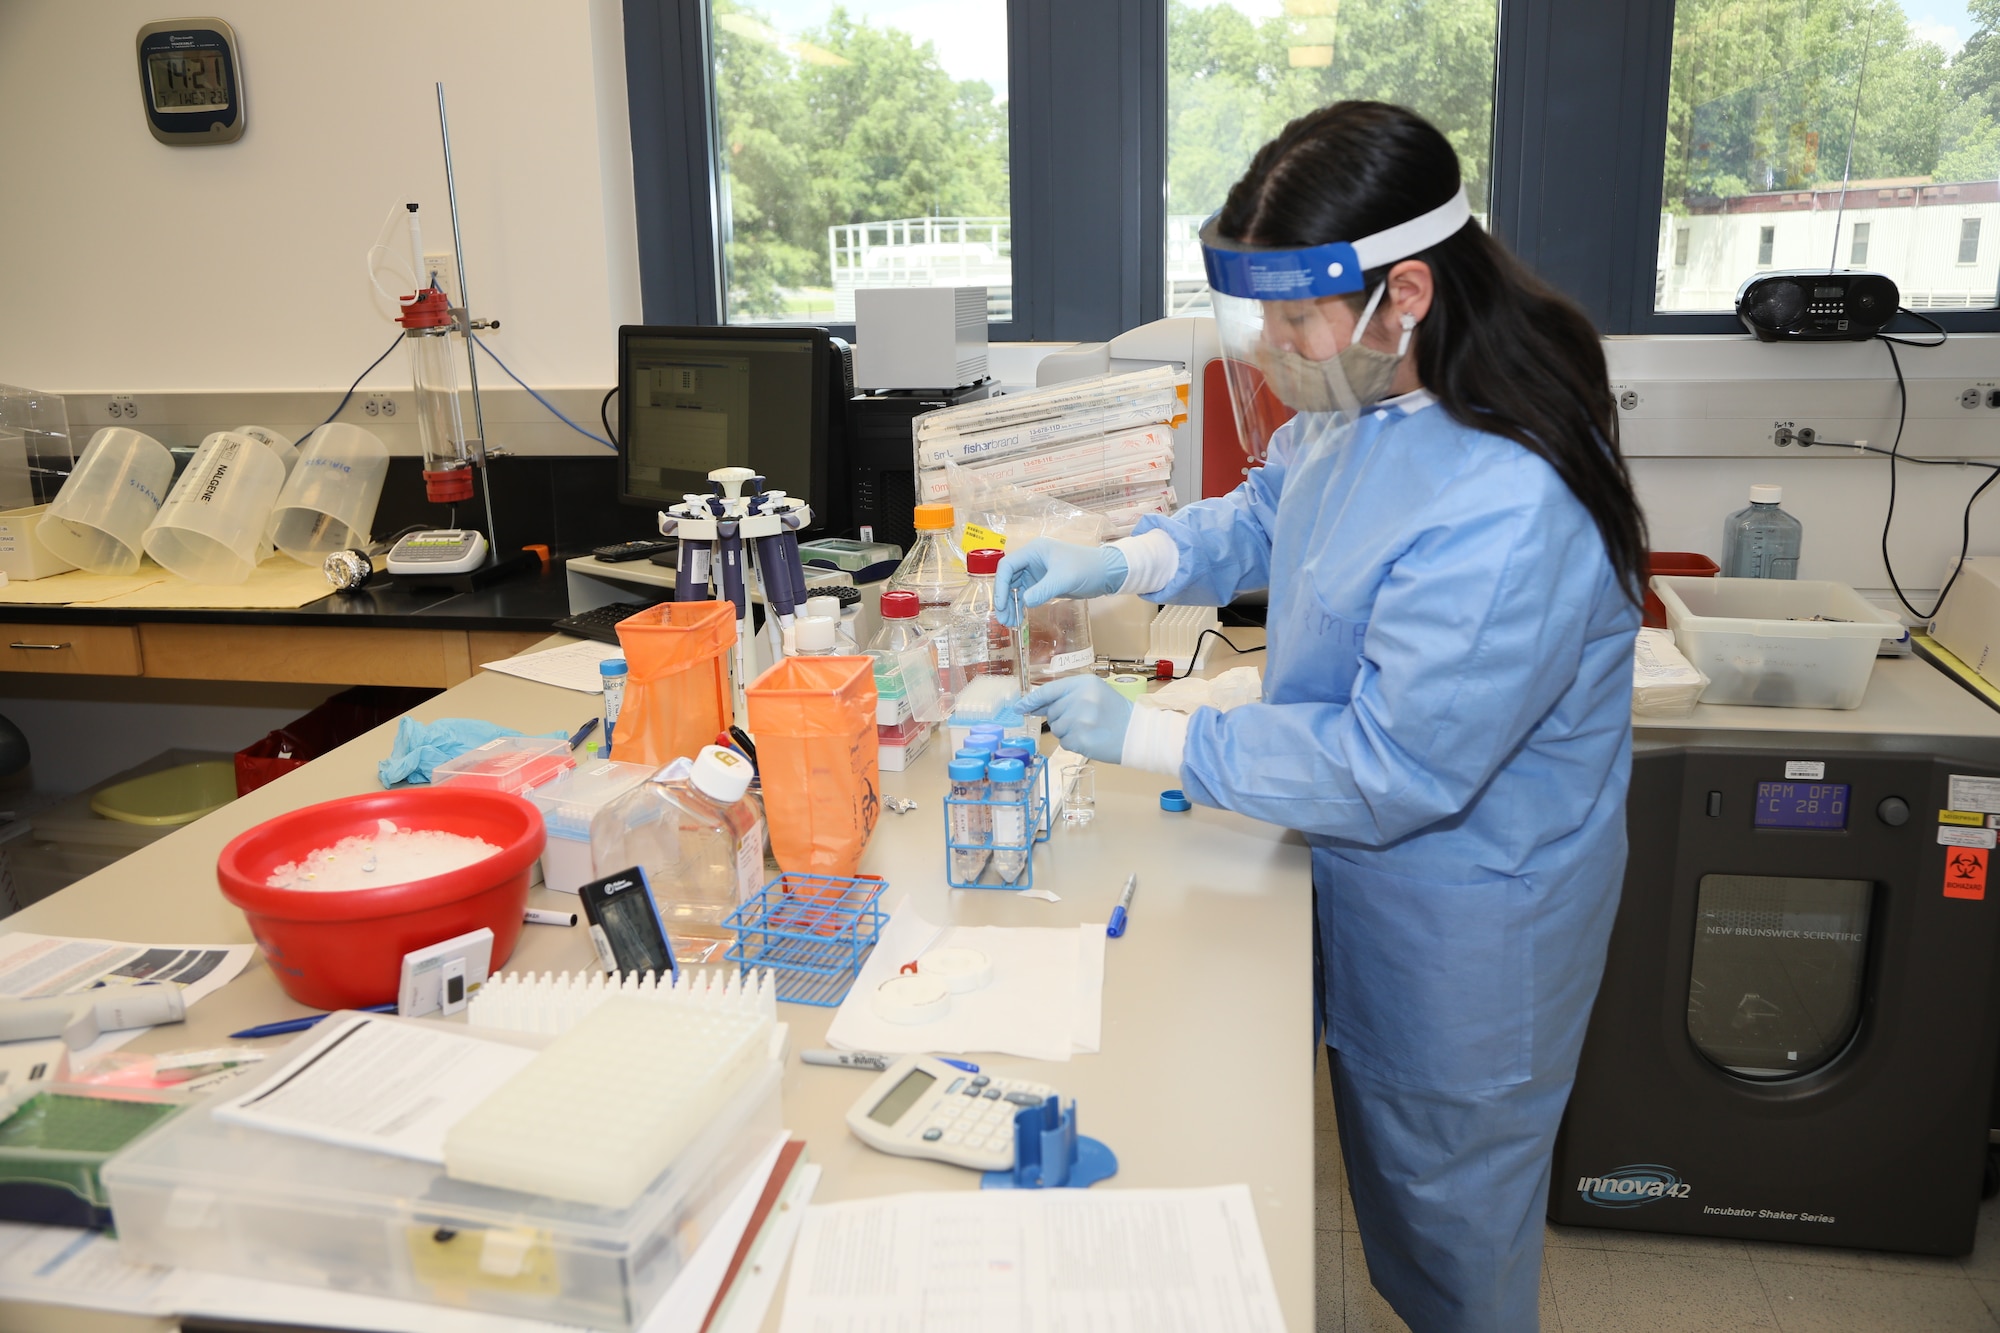 Letzibeth Mendez-Rivera a Lab Manager with The Emerging Infectious Disease Branch (EIDB), at the Walter Reed Army Institute of Research (WRAIR), studies Coronavirus protein samples, June 1, 2020. The EIDB is part of WRAIR's effort to produce a COVID-19 vaccine candidate. (U.S. Army photo by Mike Walters/ Released)